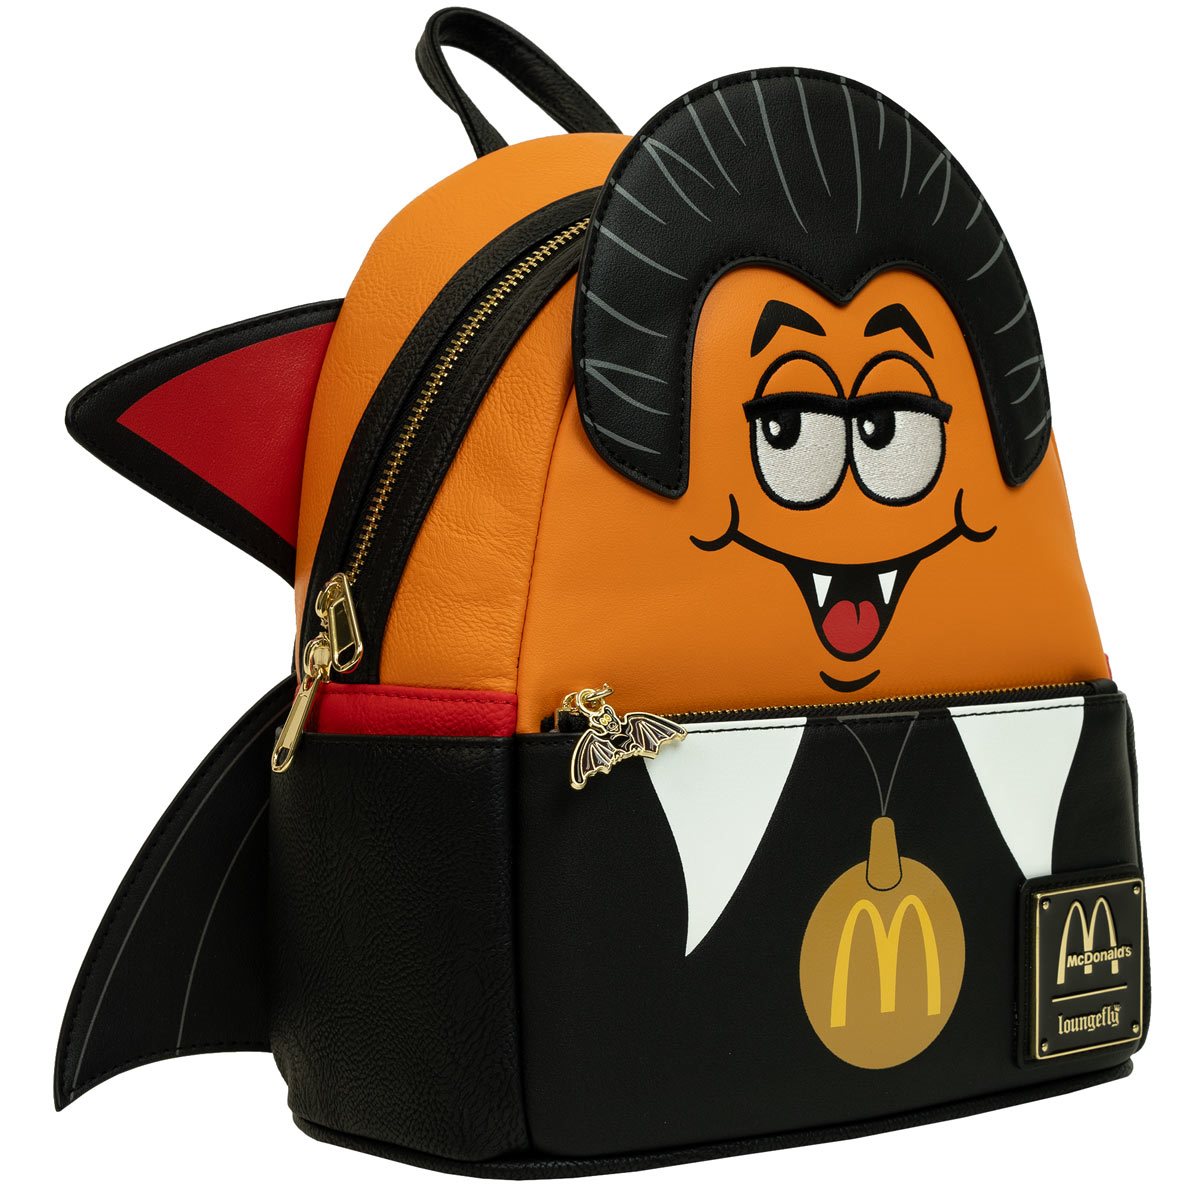 Buy McDonald's Happy Meal Mini Backpack at Loungefly.